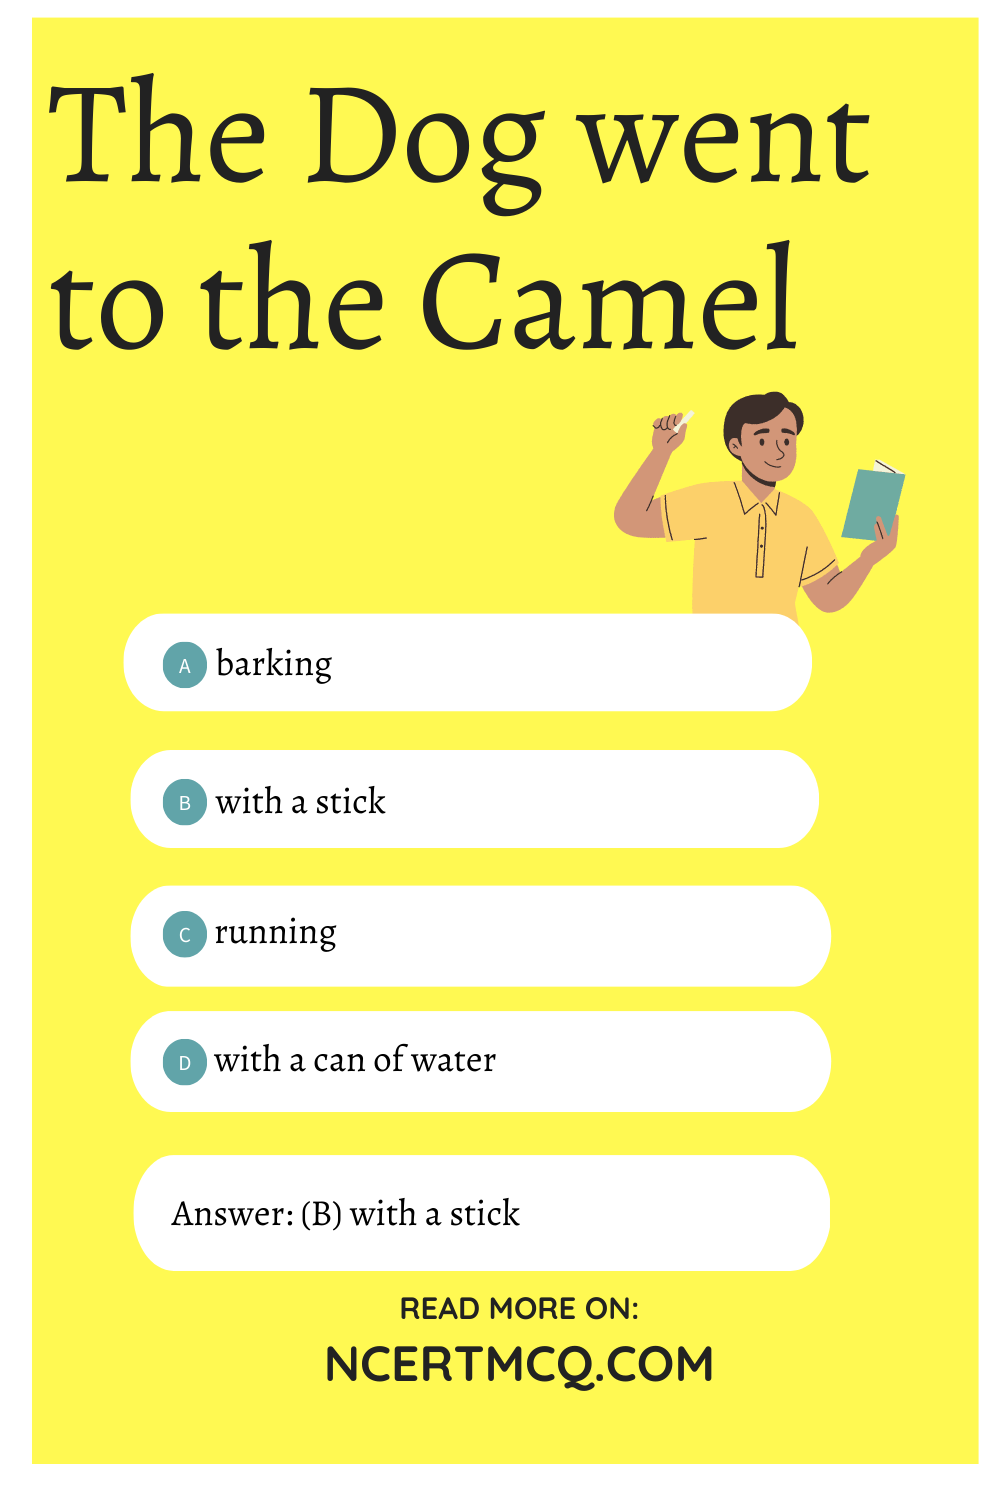 The Dog went to the Camel